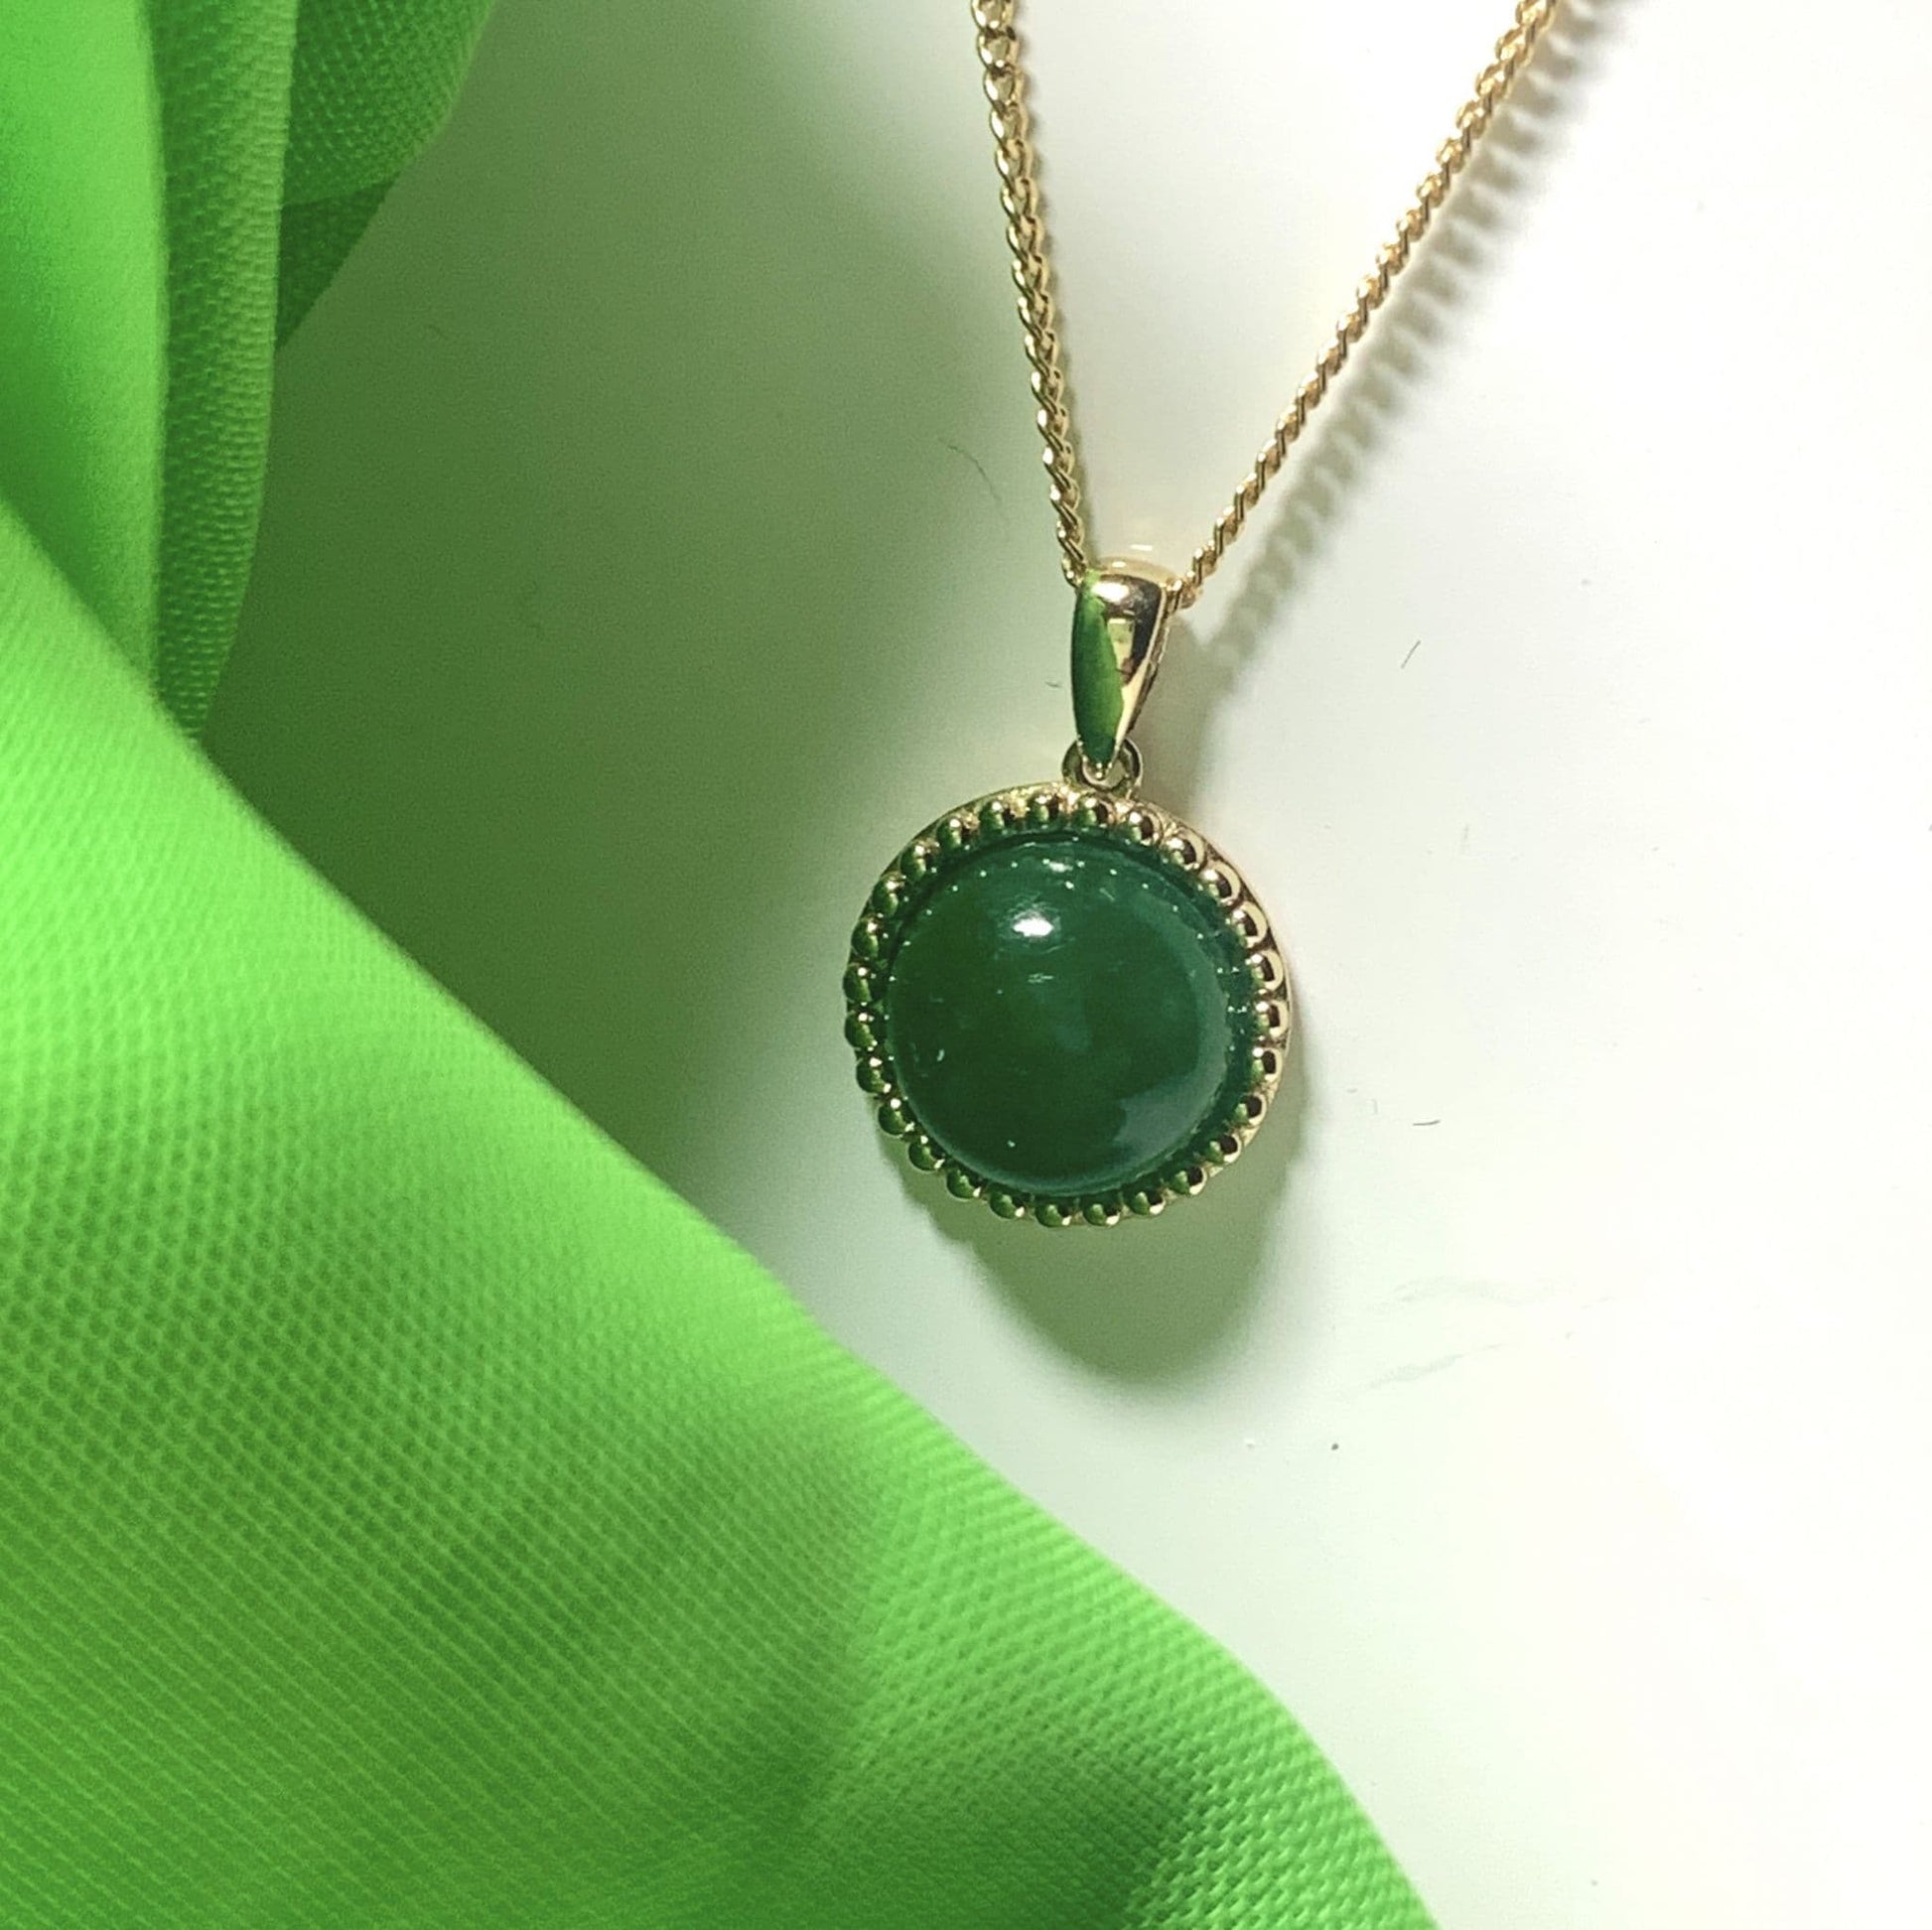 Round Green Jade Patterned Bobbled Necklace Yellow Gold Pendant